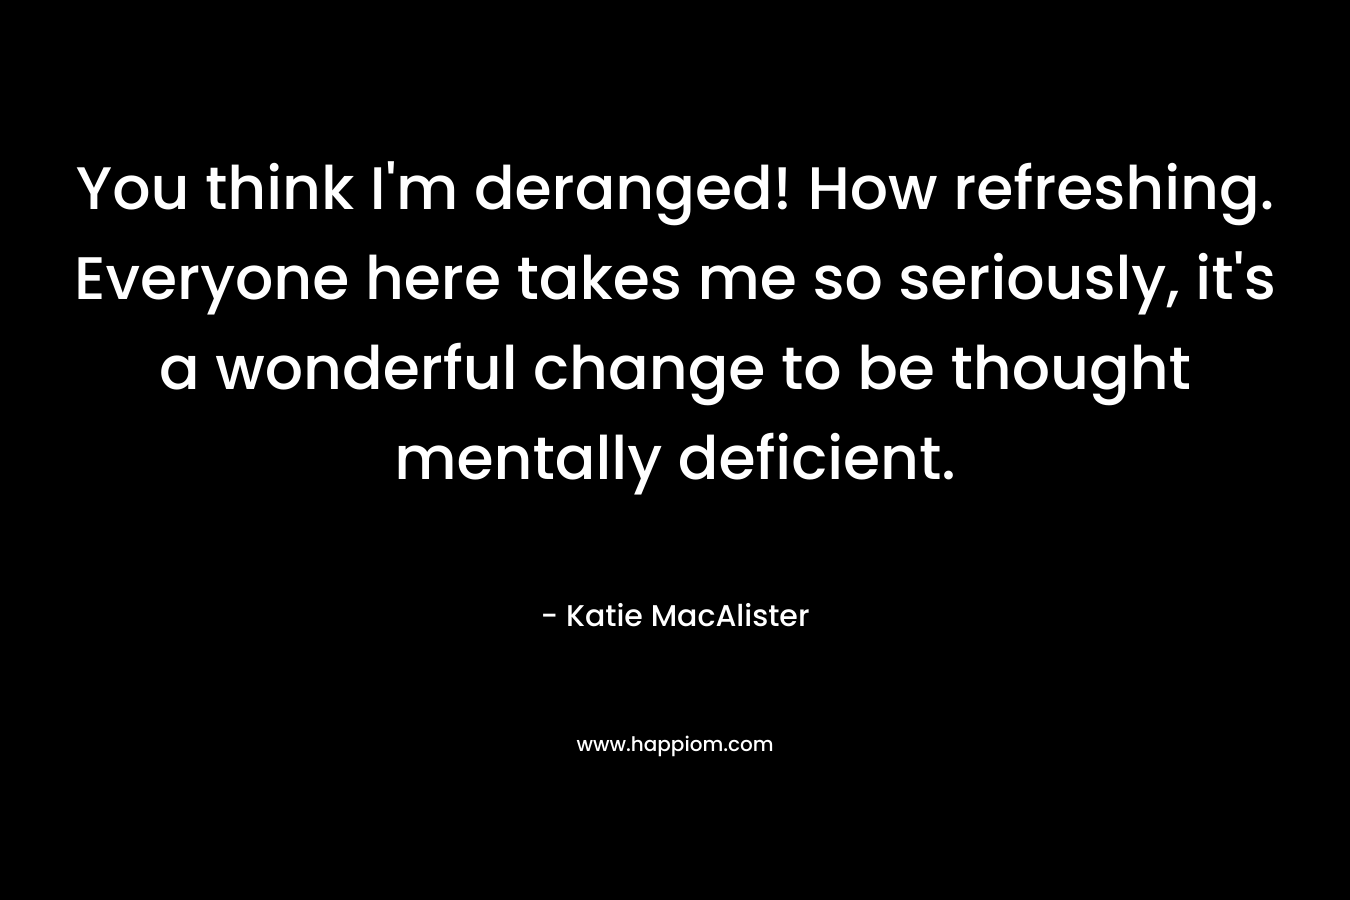 You think I’m deranged! How refreshing. Everyone here takes me so seriously, it’s a wonderful change to be thought mentally deficient. – Katie MacAlister